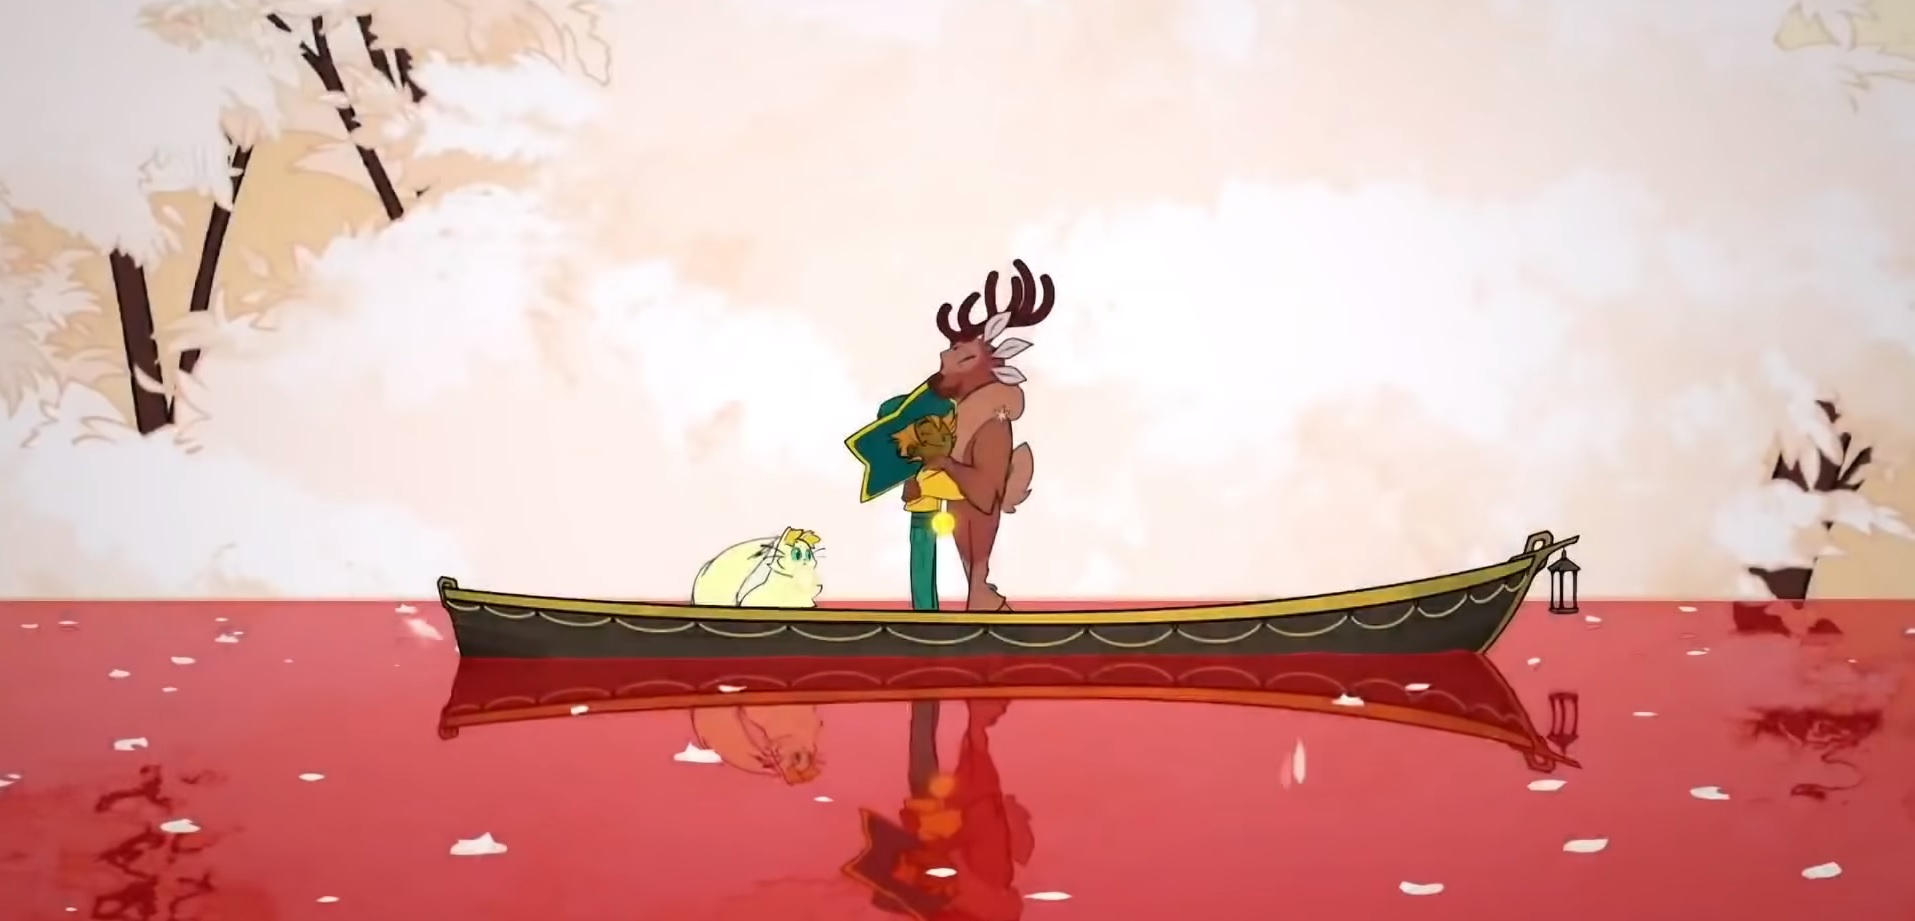 Spiritfarer loading screen with animals on a canoe in red water